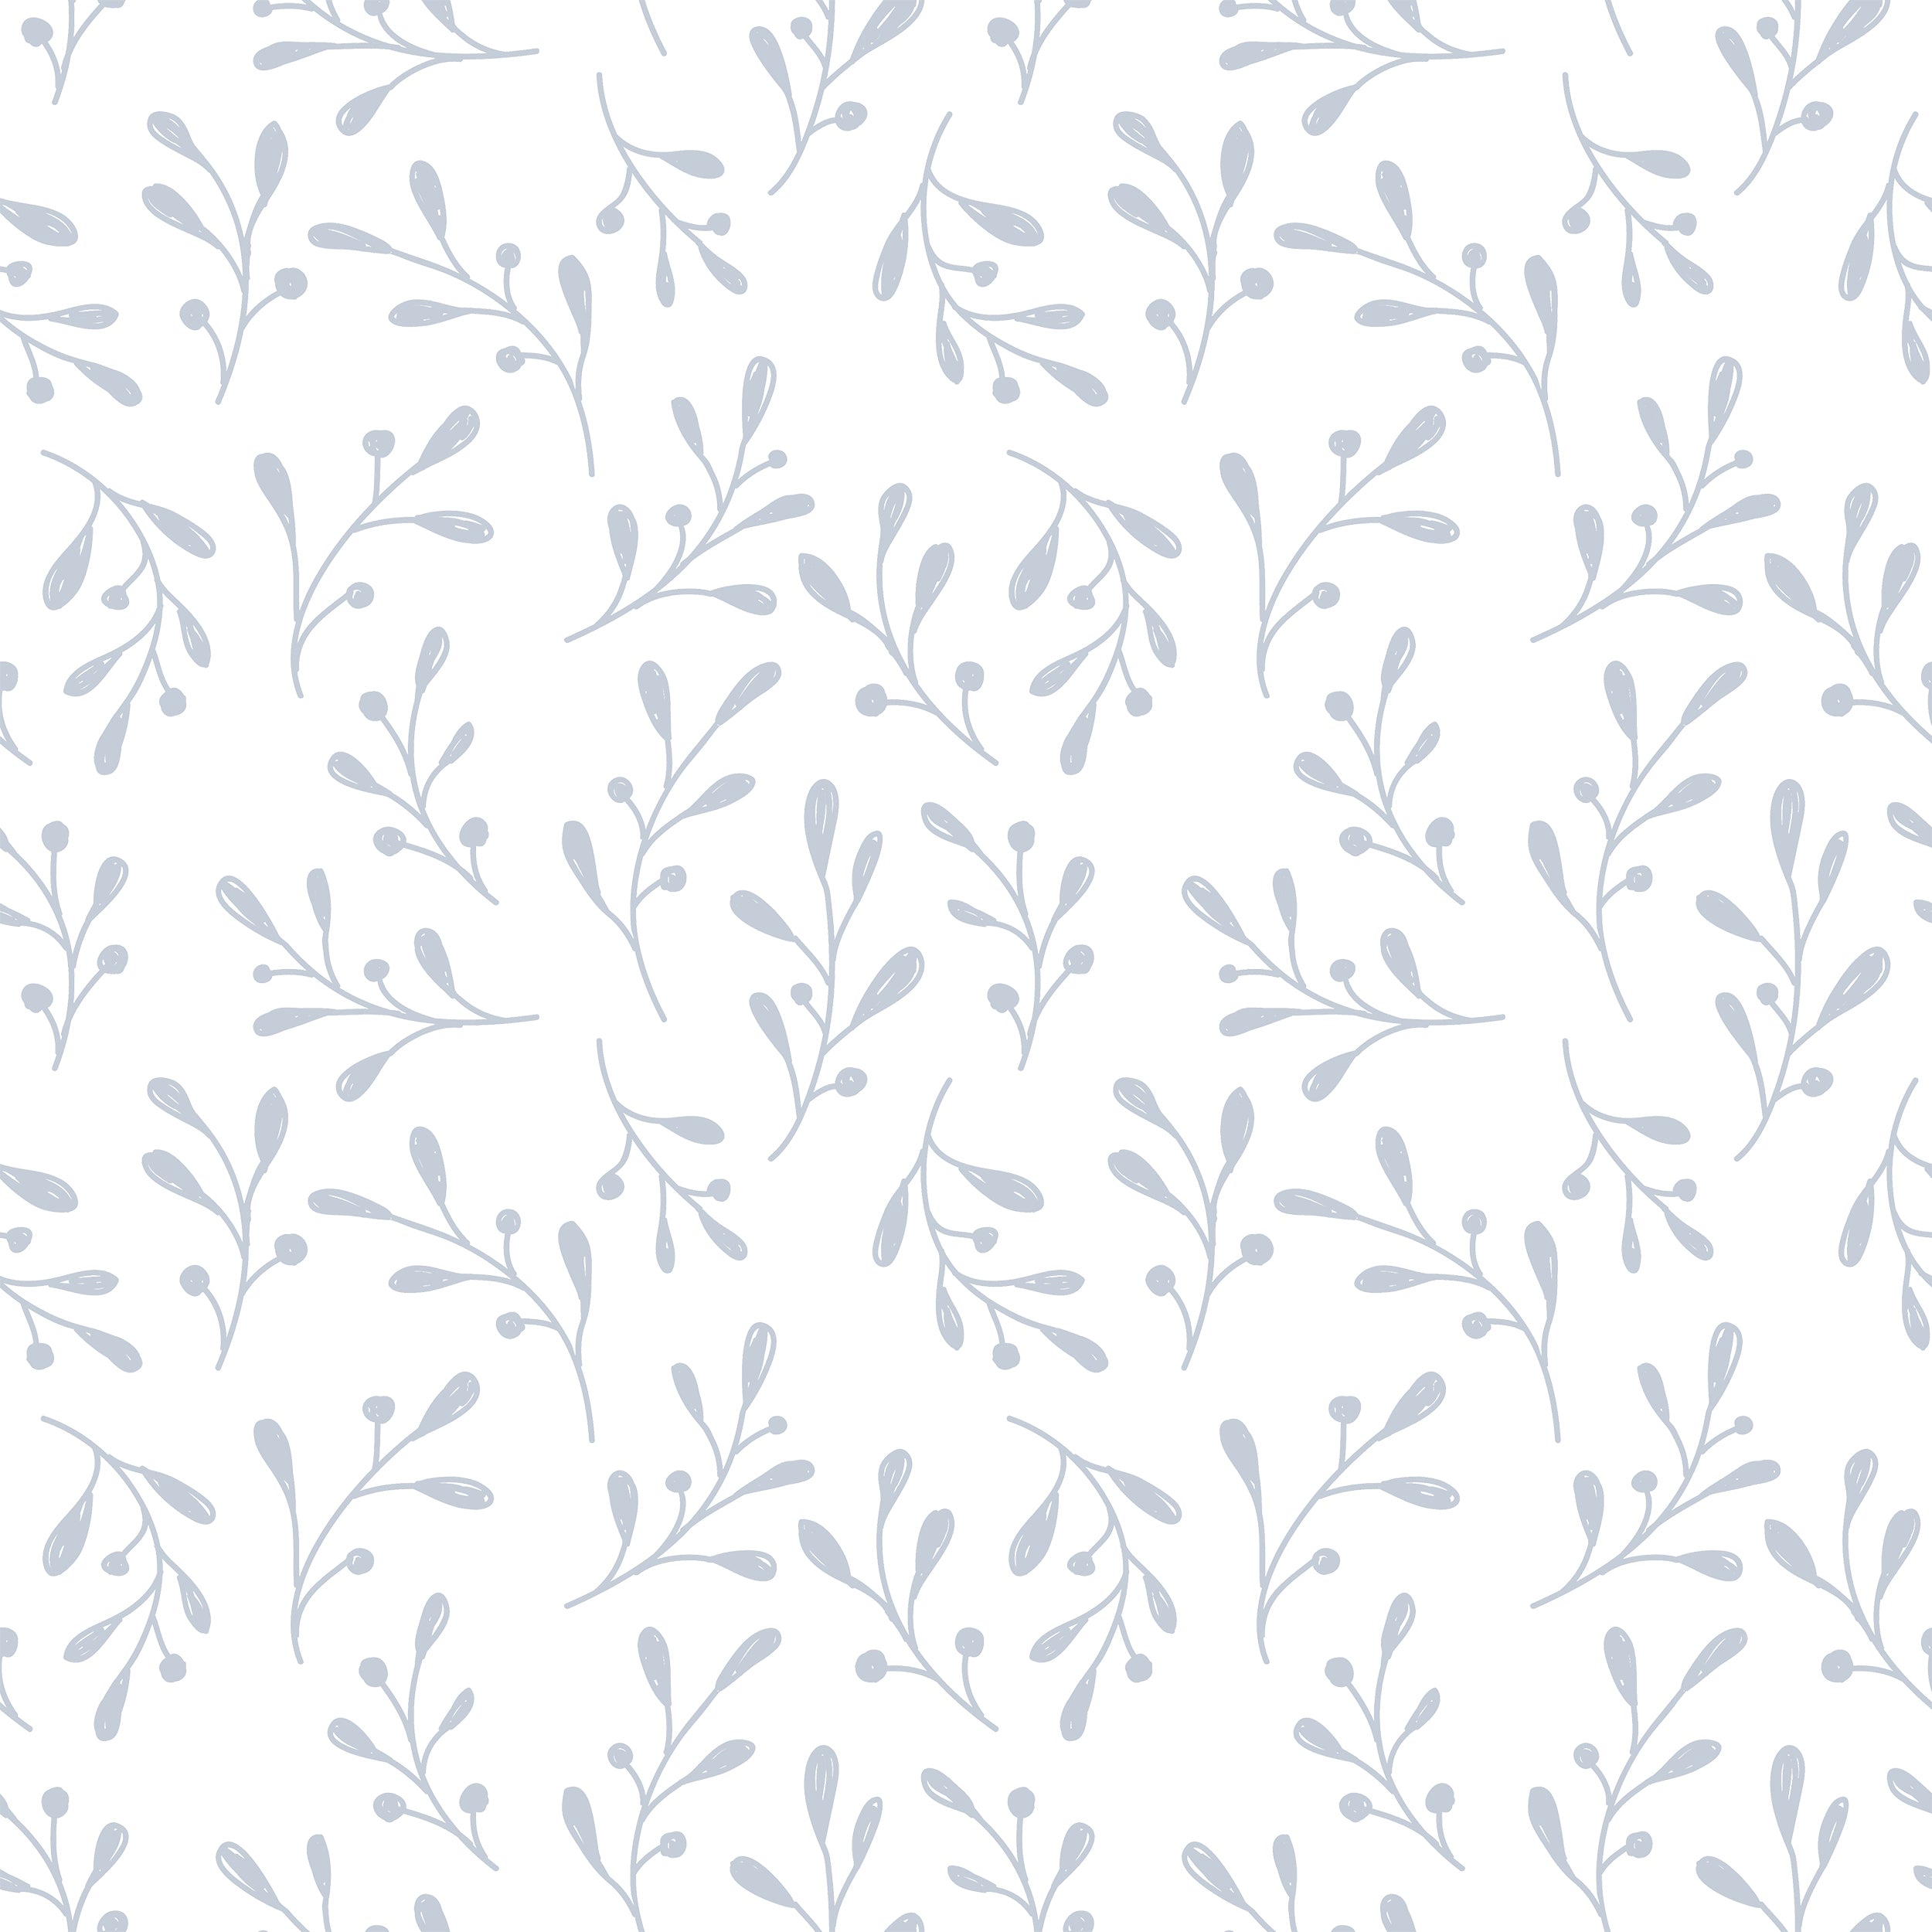 A close-up view of the Natural Wallpaper II, highlighting the graceful grey botanical sprig pattern distributed evenly across a clean white background. The design radiates a calm and organic feel, suitable for creating a soothing environment.